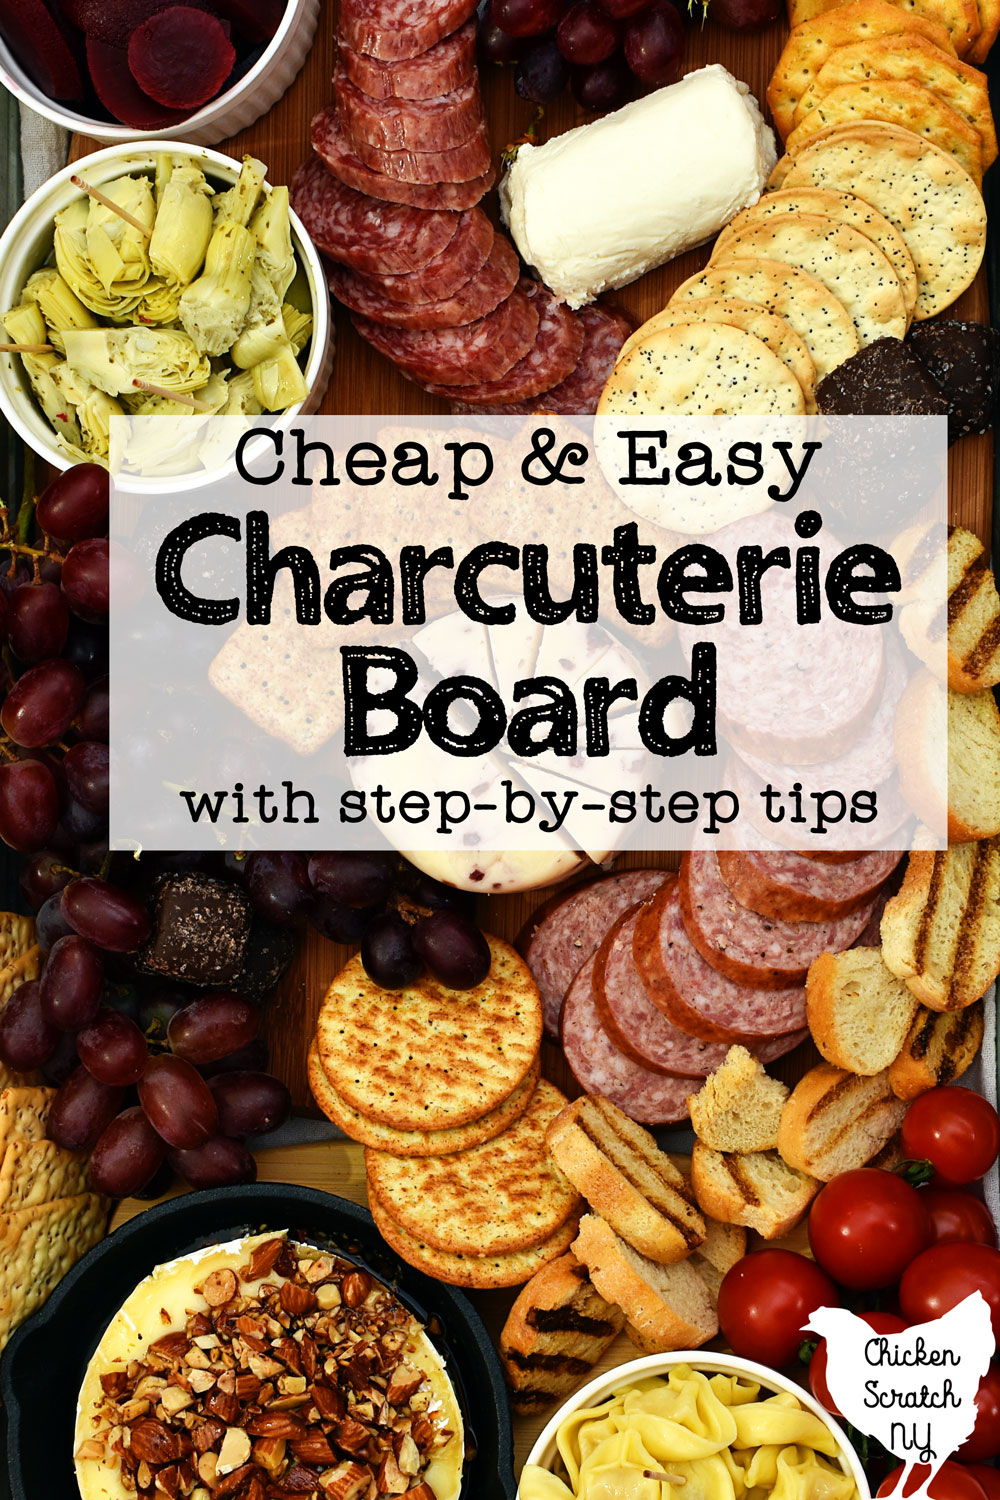 close up view of home made budget charcuterie board including grapes, summer sausage, crackers, maple almond brie, goat cheese, artichoke hearts and more with text overlay "cheap and easy charcuterie board with step-by-step tips"